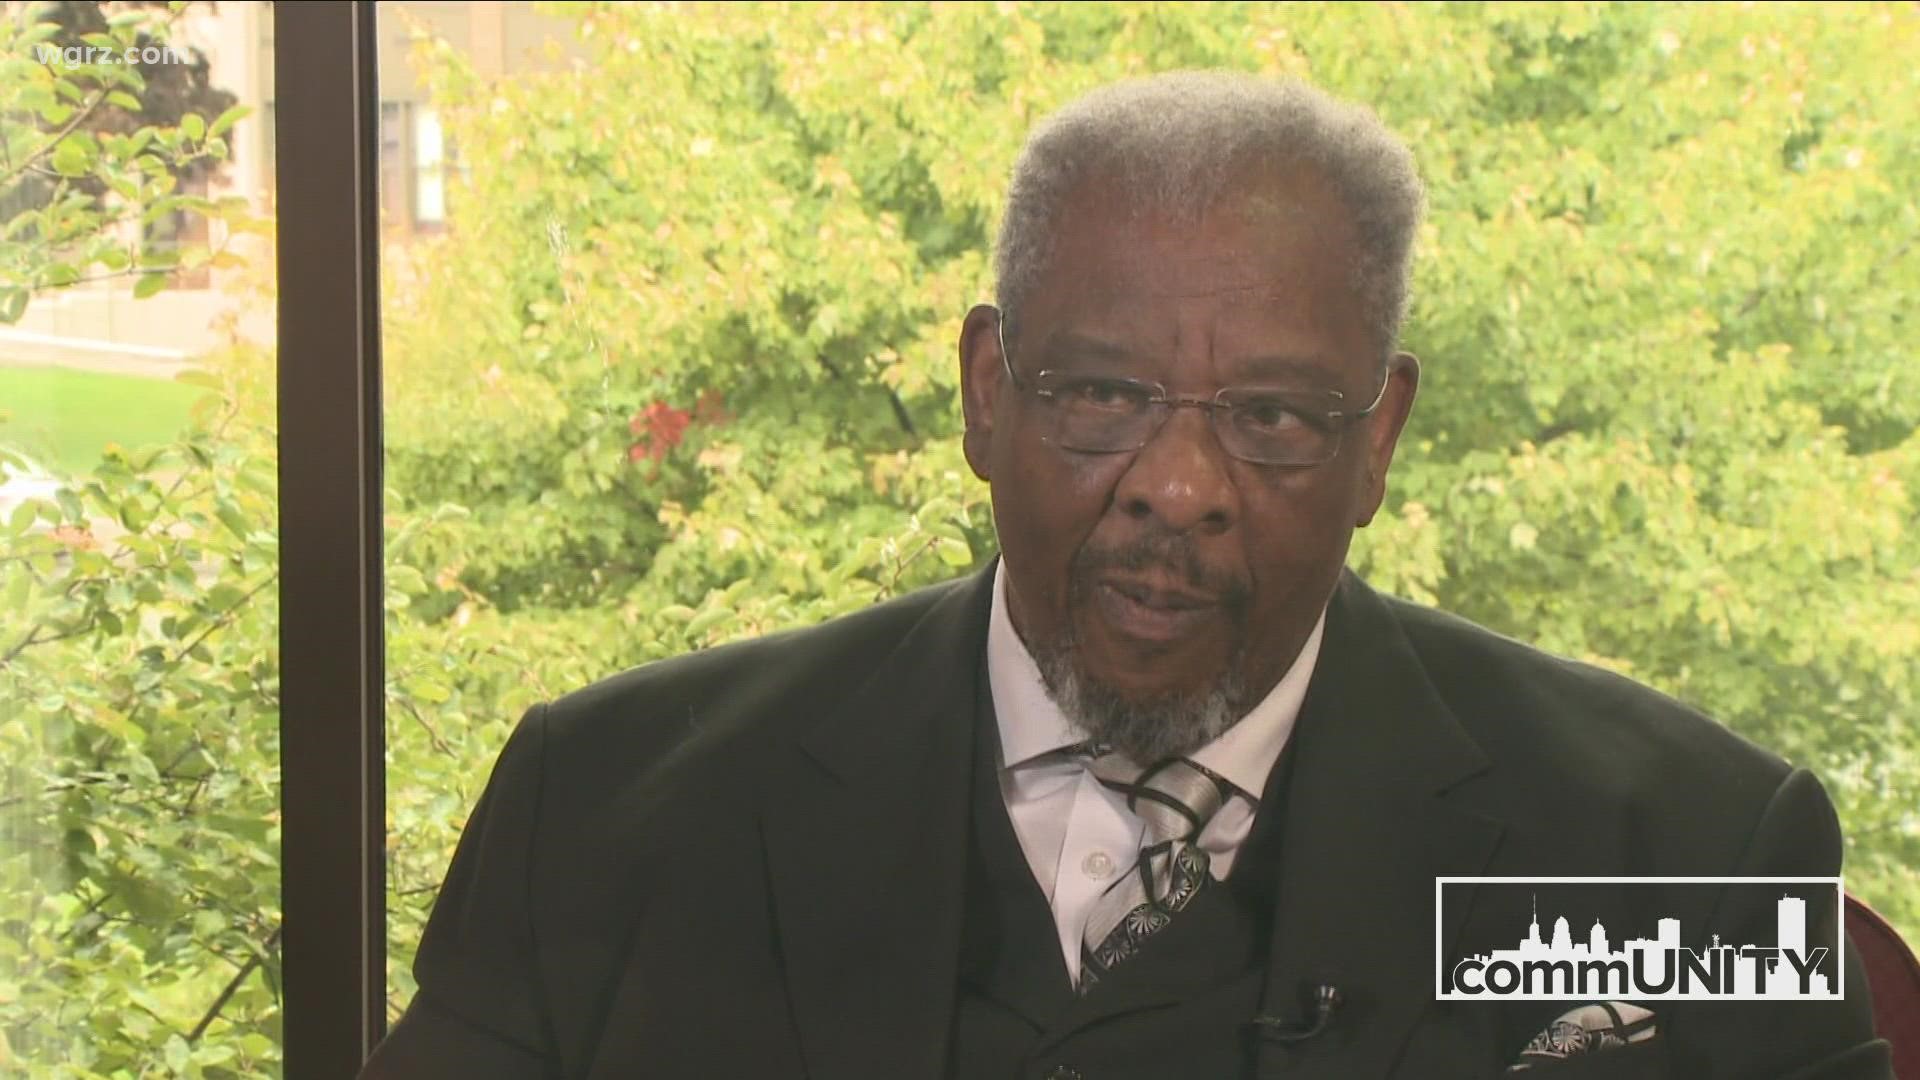 The pastor led Mount Olive Baptist Church on East Delavan for decades. He was remembered for pushing for better housing and education in Buffalo.